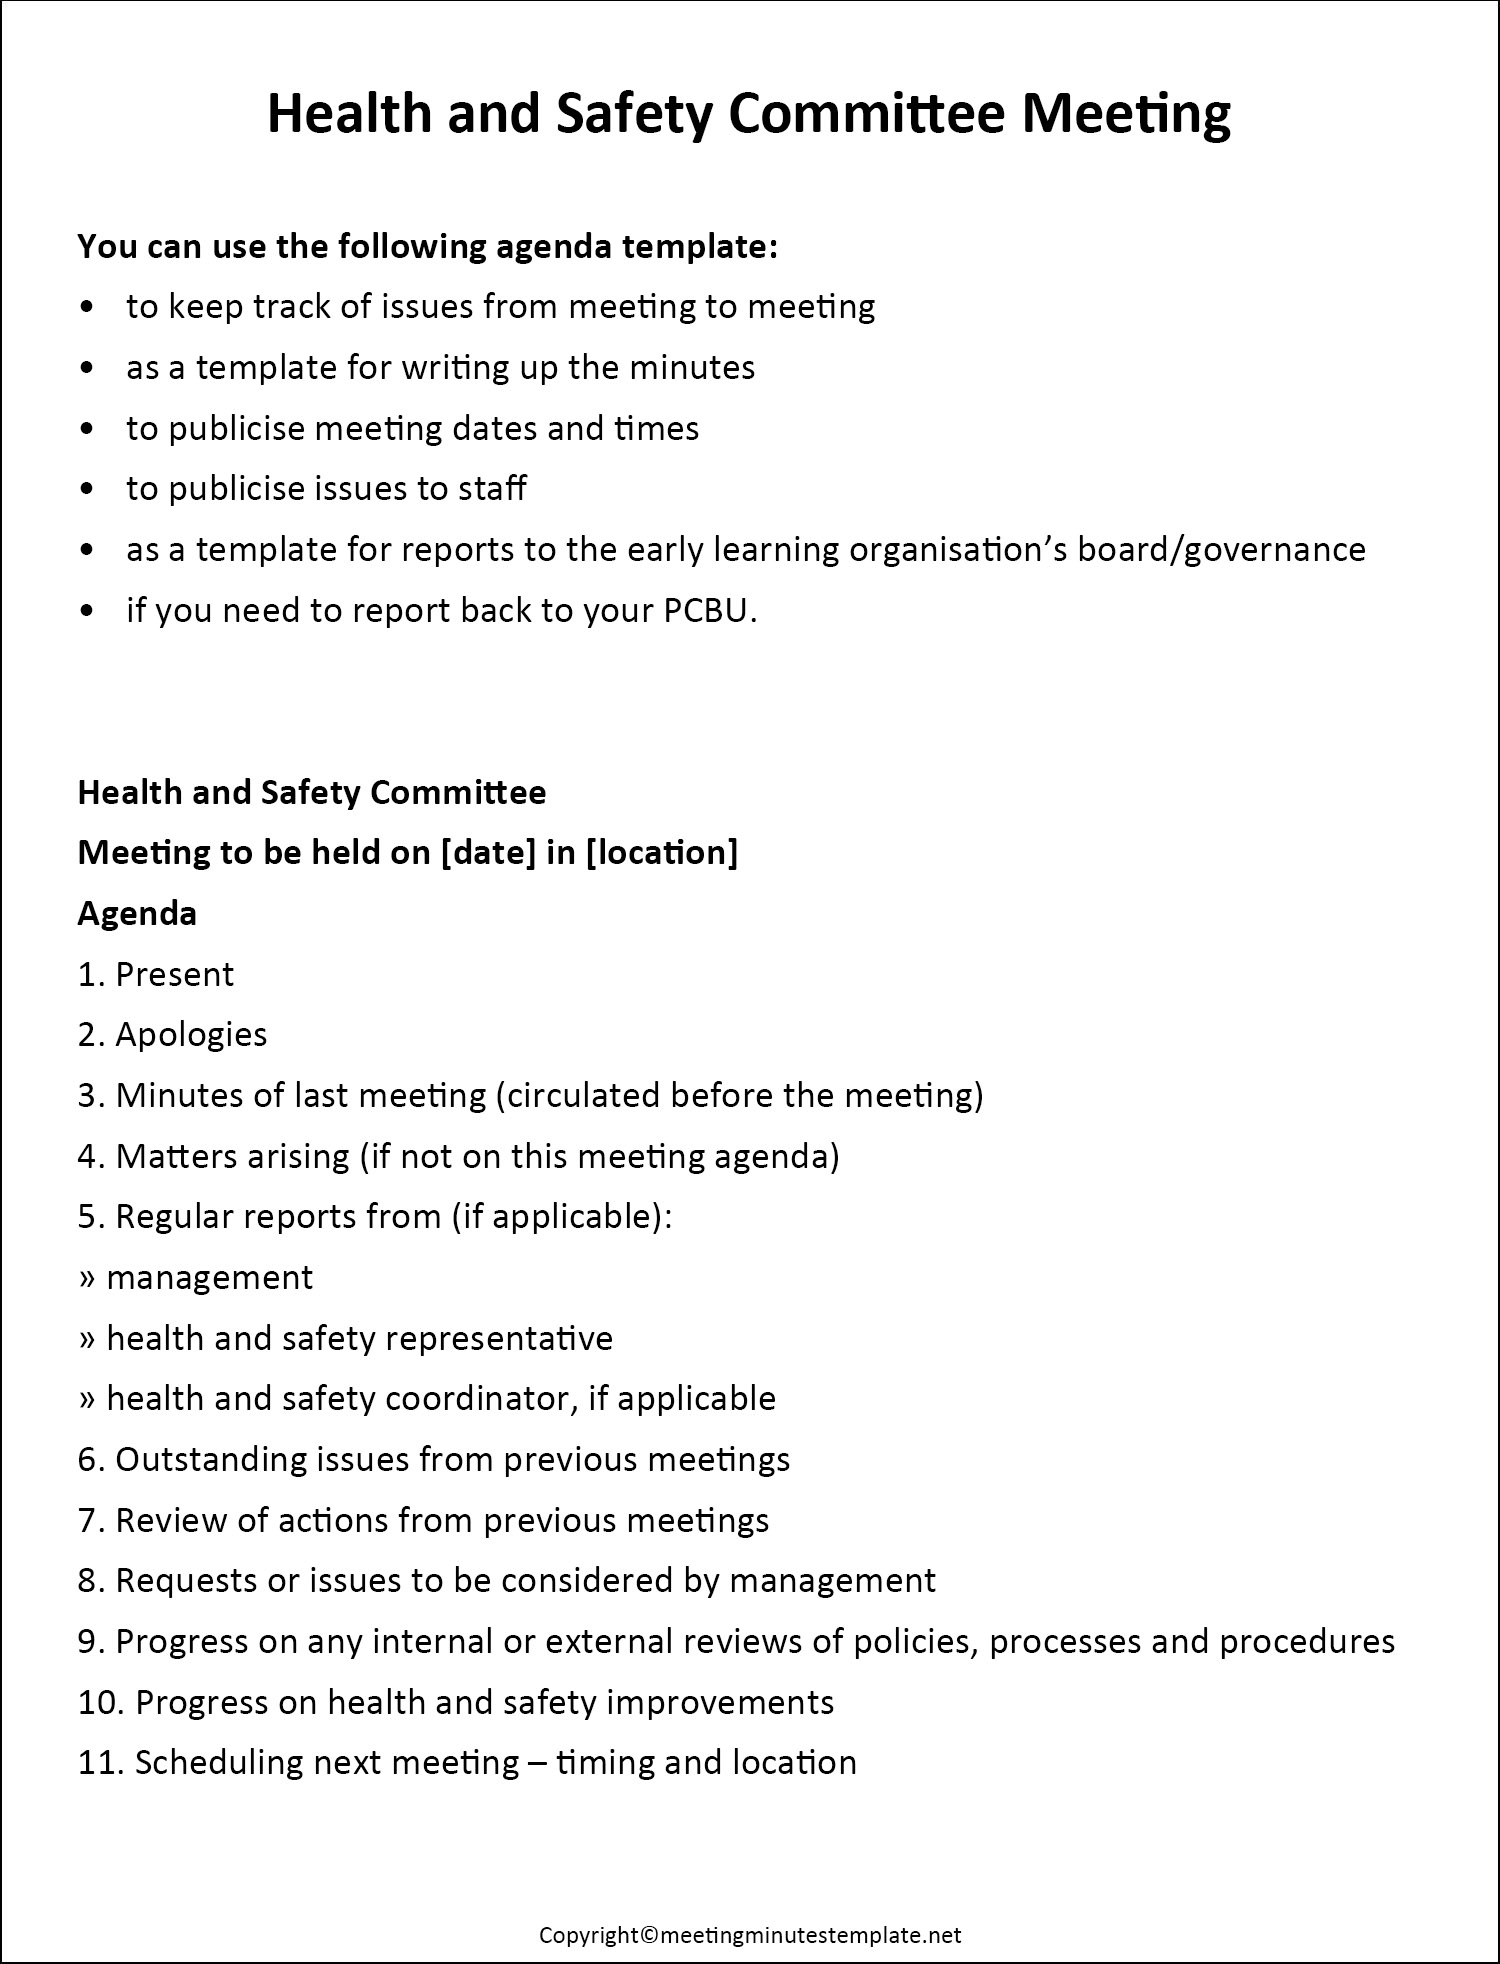 Health and Safety Committee Meeting Minutes Template